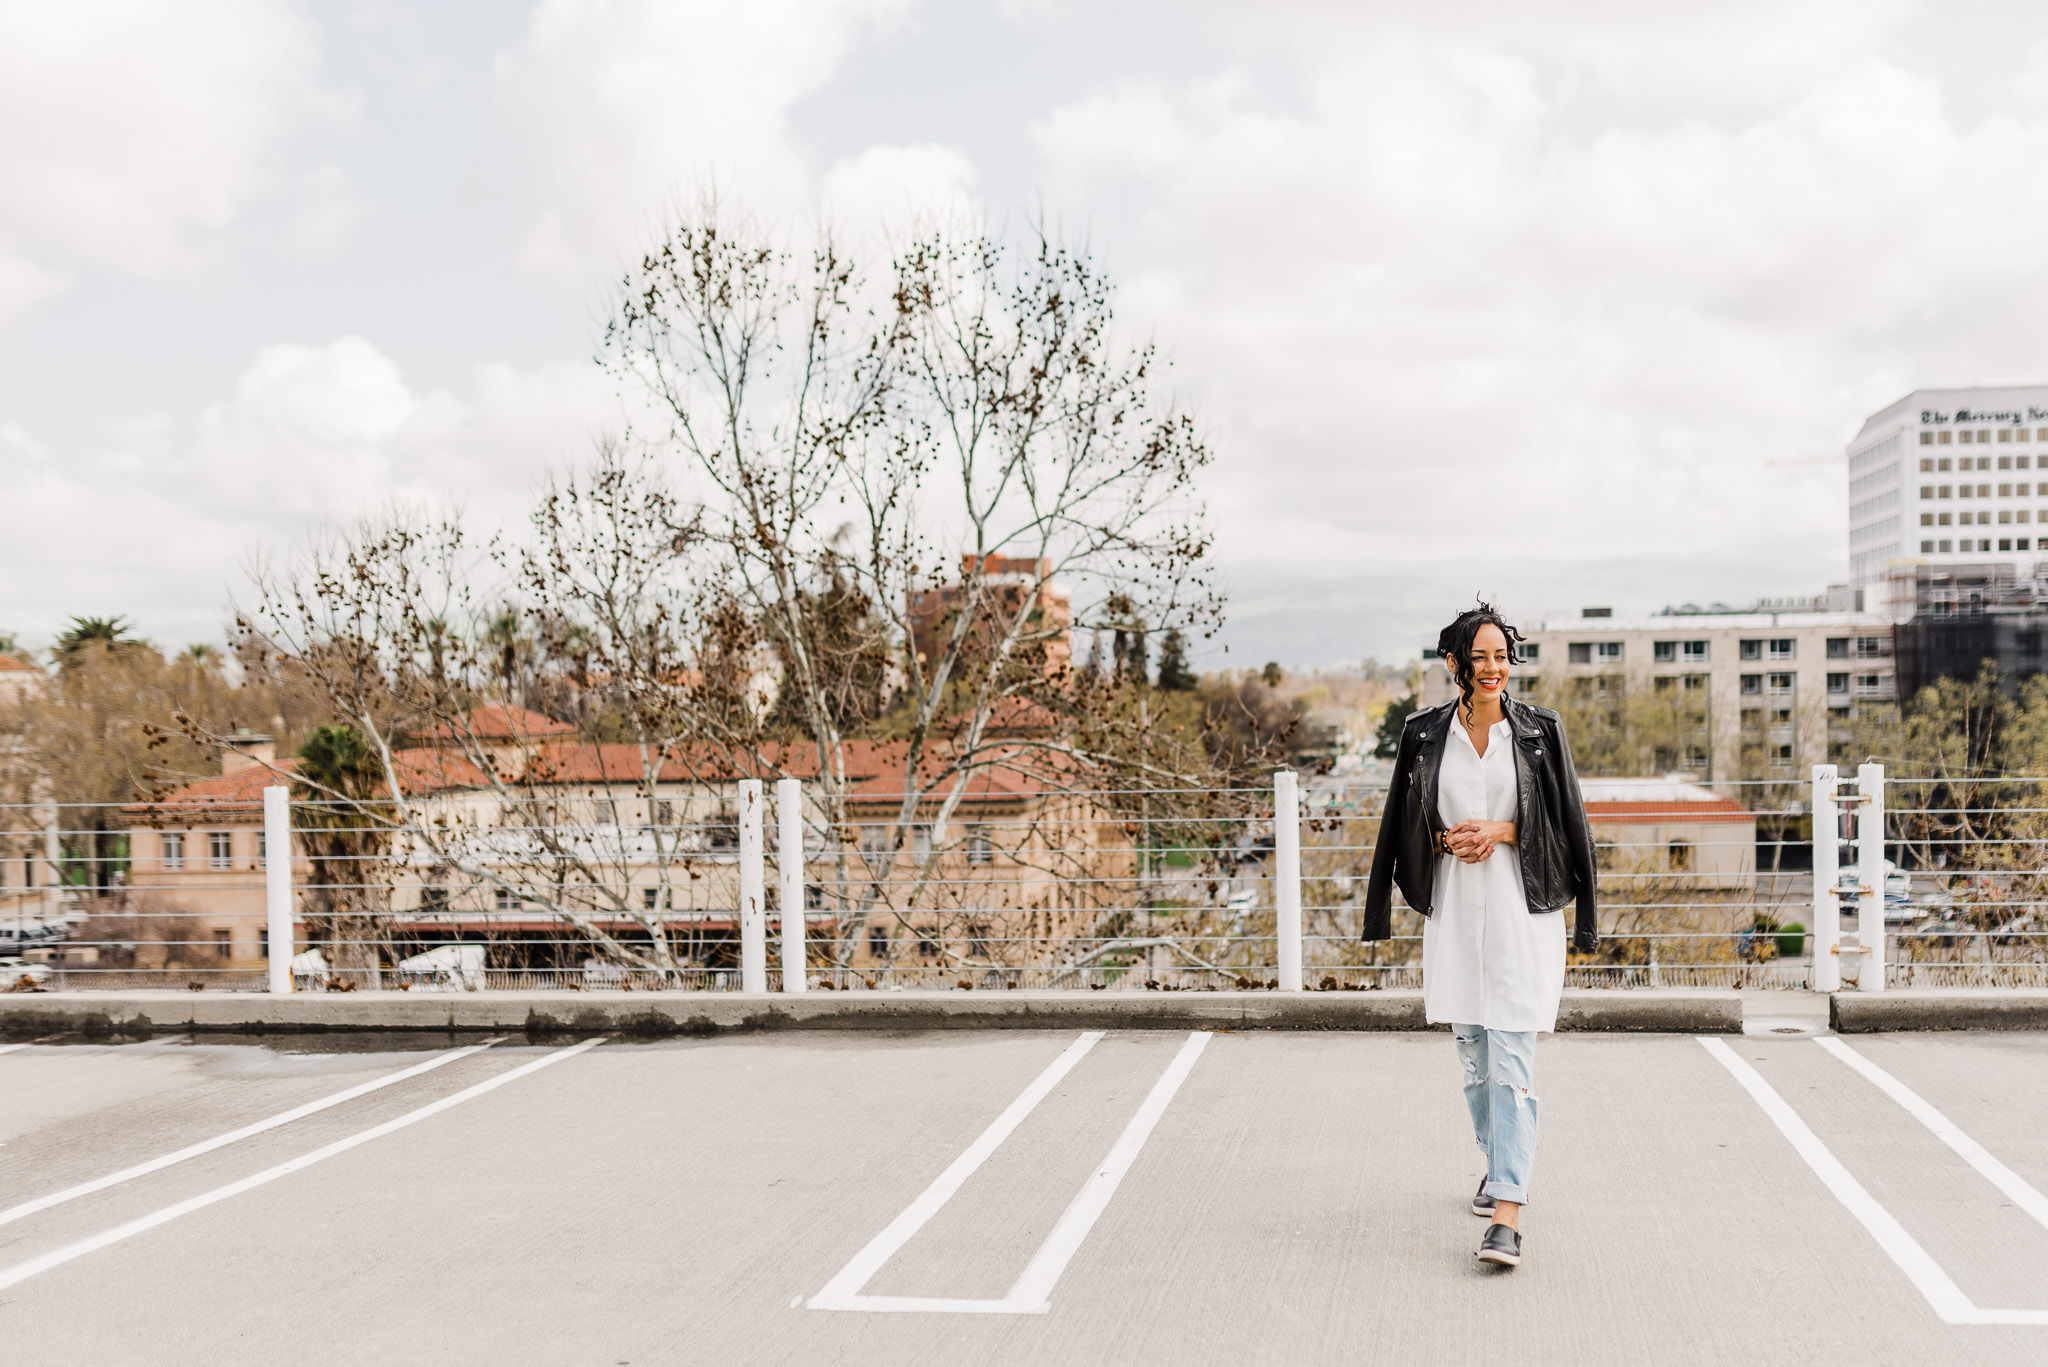 Fun portrait of a woman wearing a white tunic, black leather jacket, and light wash jeans. She's on top of a parking structure with San Jose's skyline in the background.